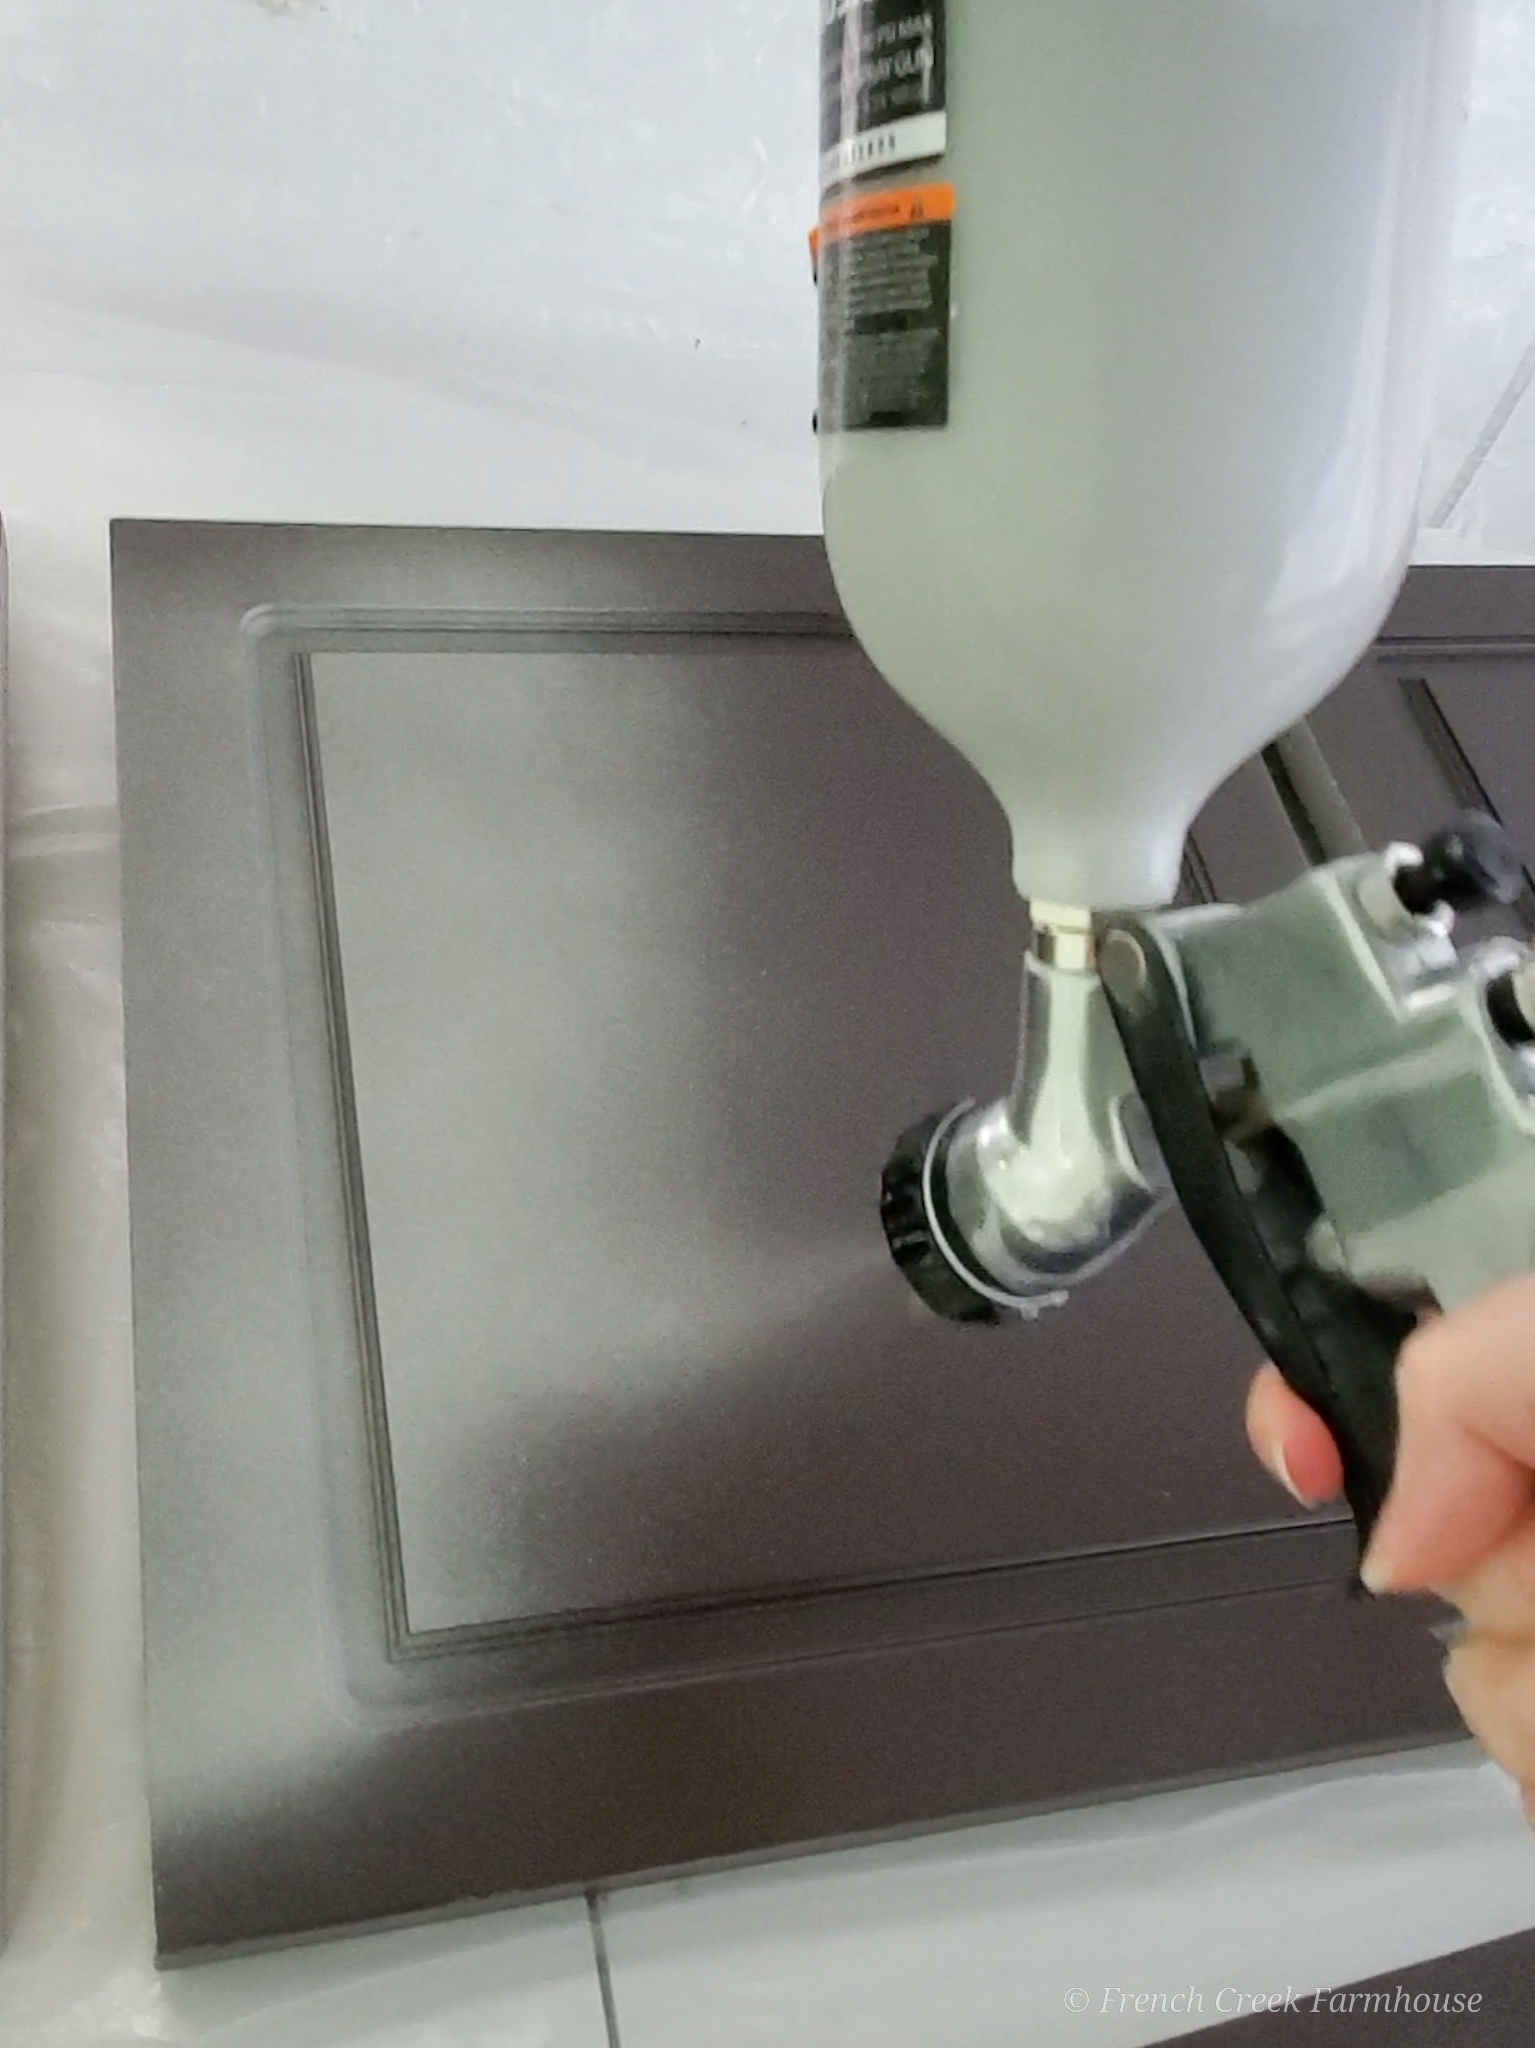 The best way to get a professional finish is with an HVLP spray gun